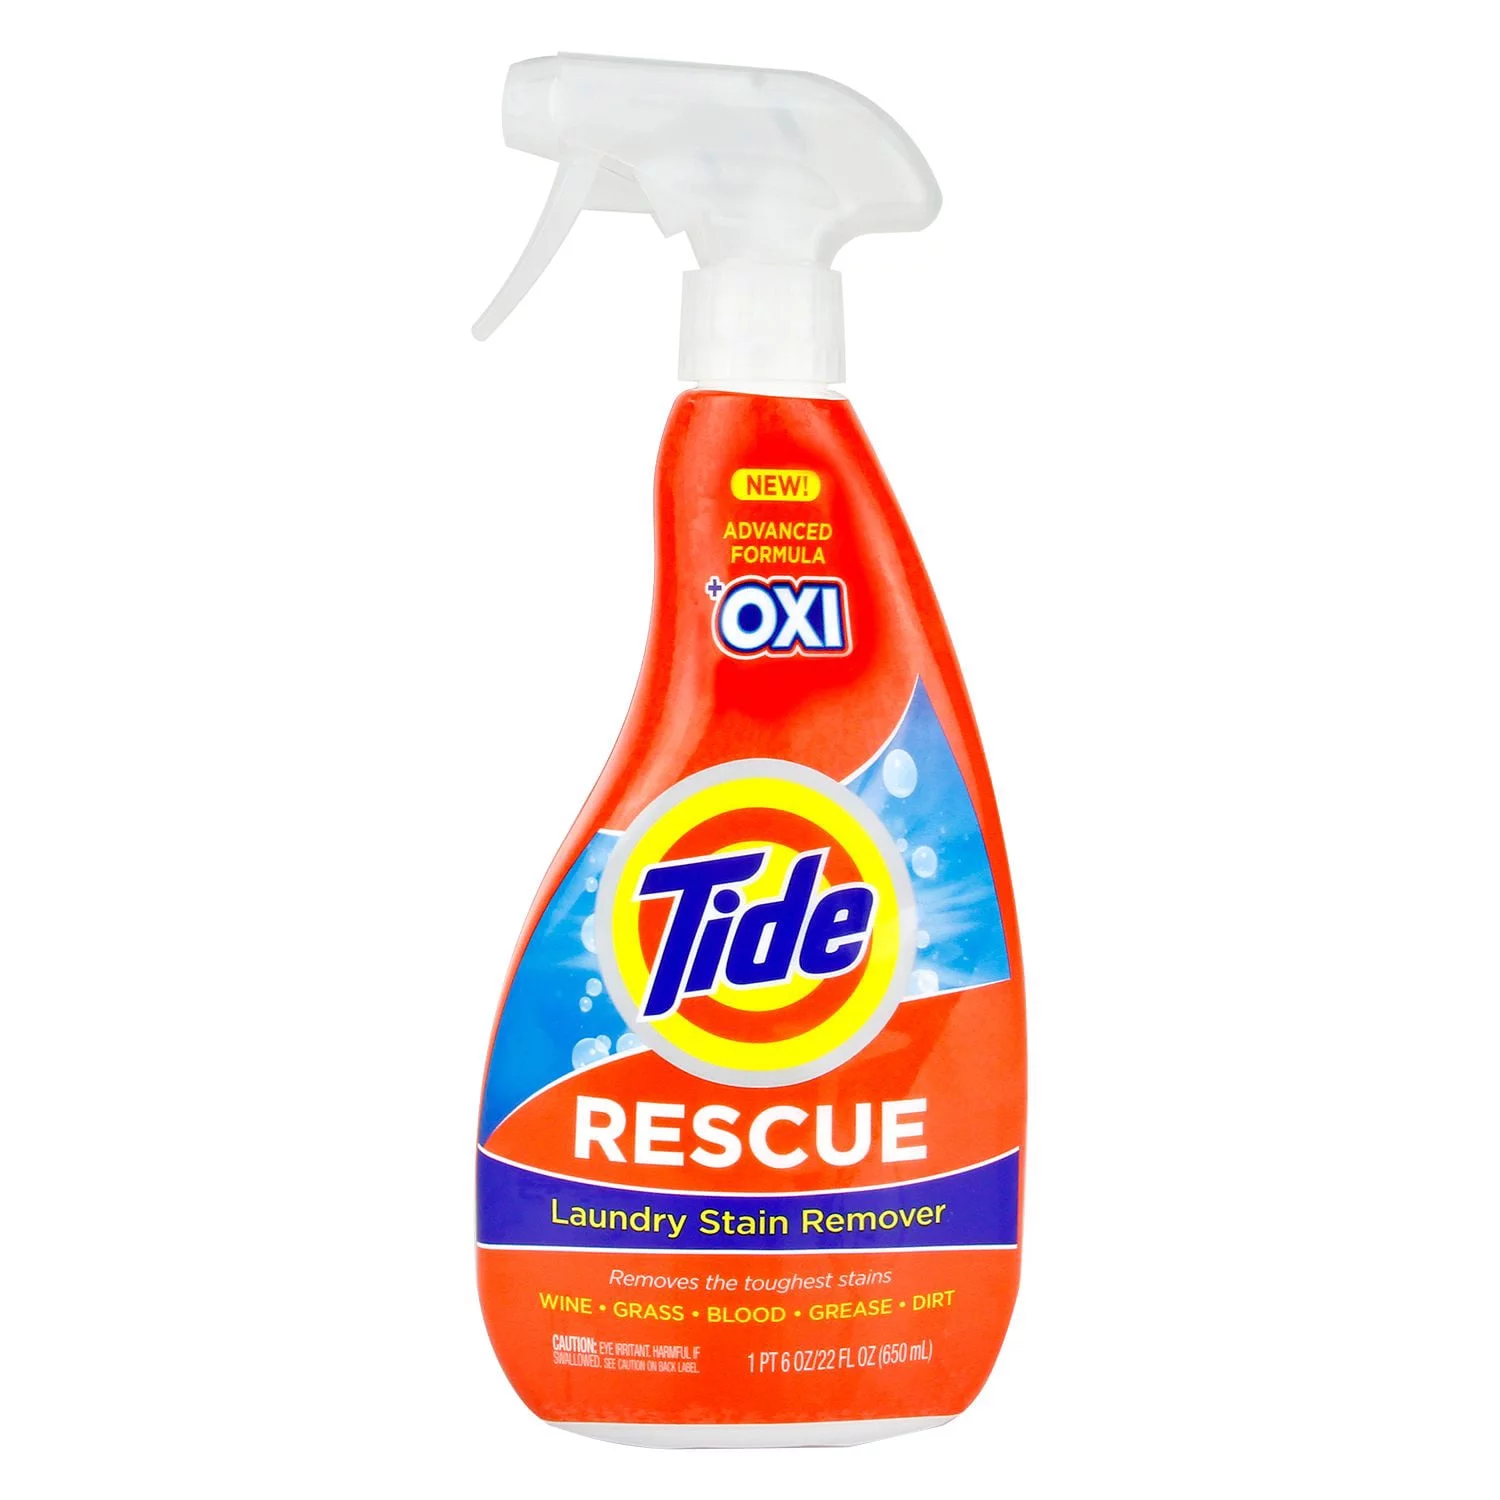 Tide Rescue   Oxi Spray and Wash Laundry and Carpet Cleaning Stain Remover, 22 fl oz